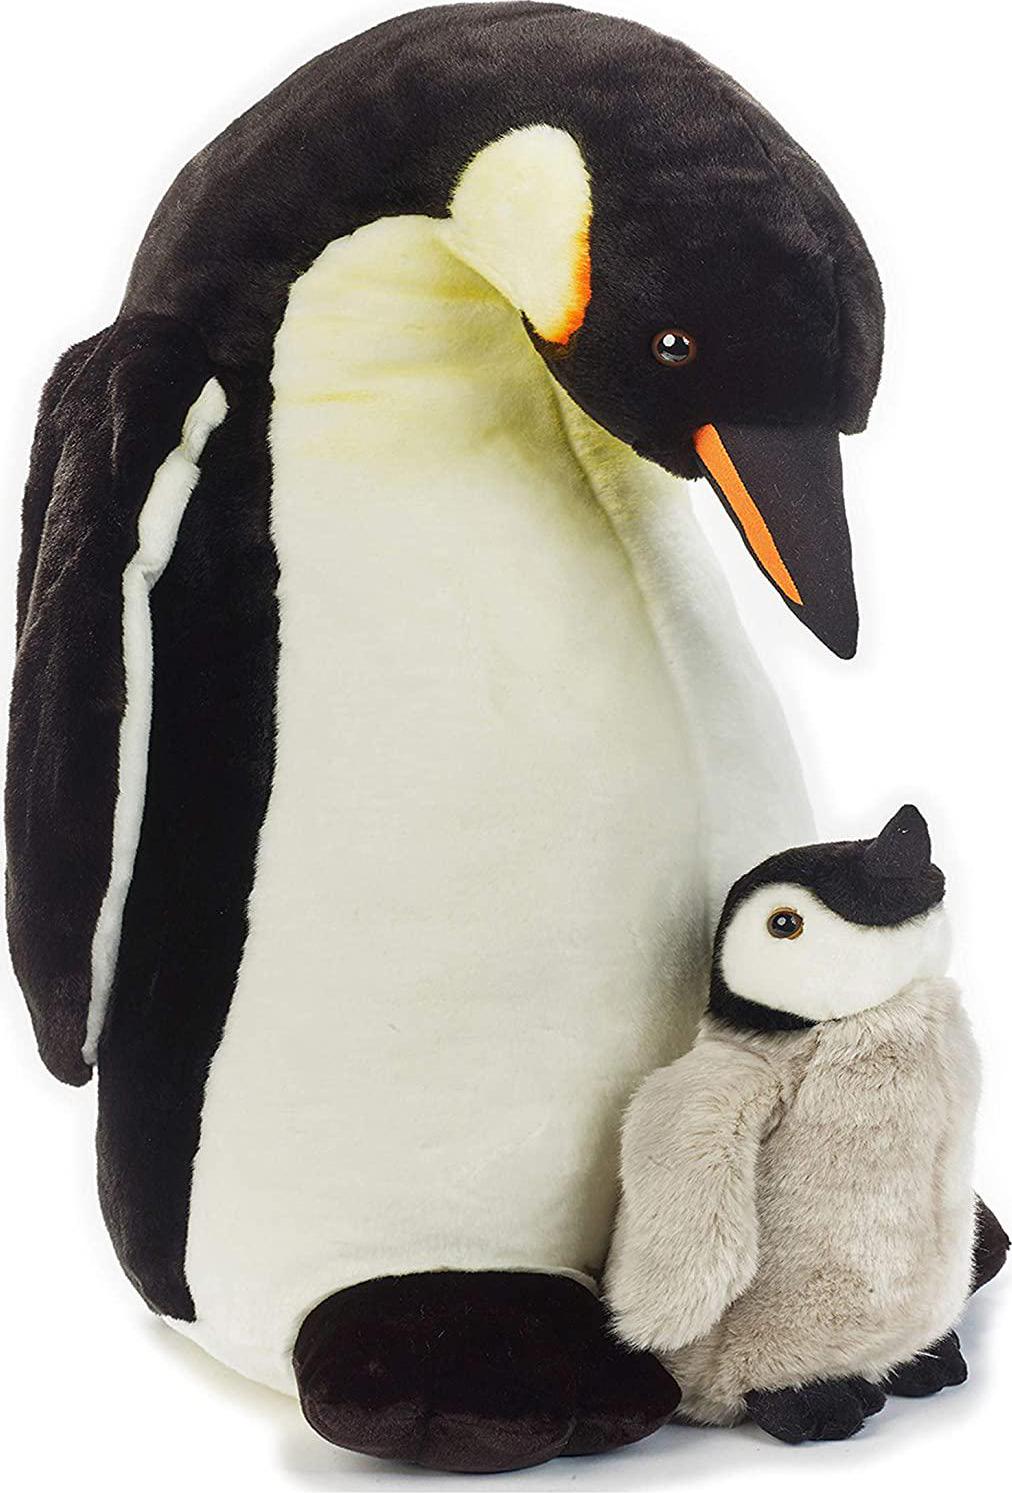 National Geographic, Lelly - National Geographic Plush, Giant Penguin with Baby